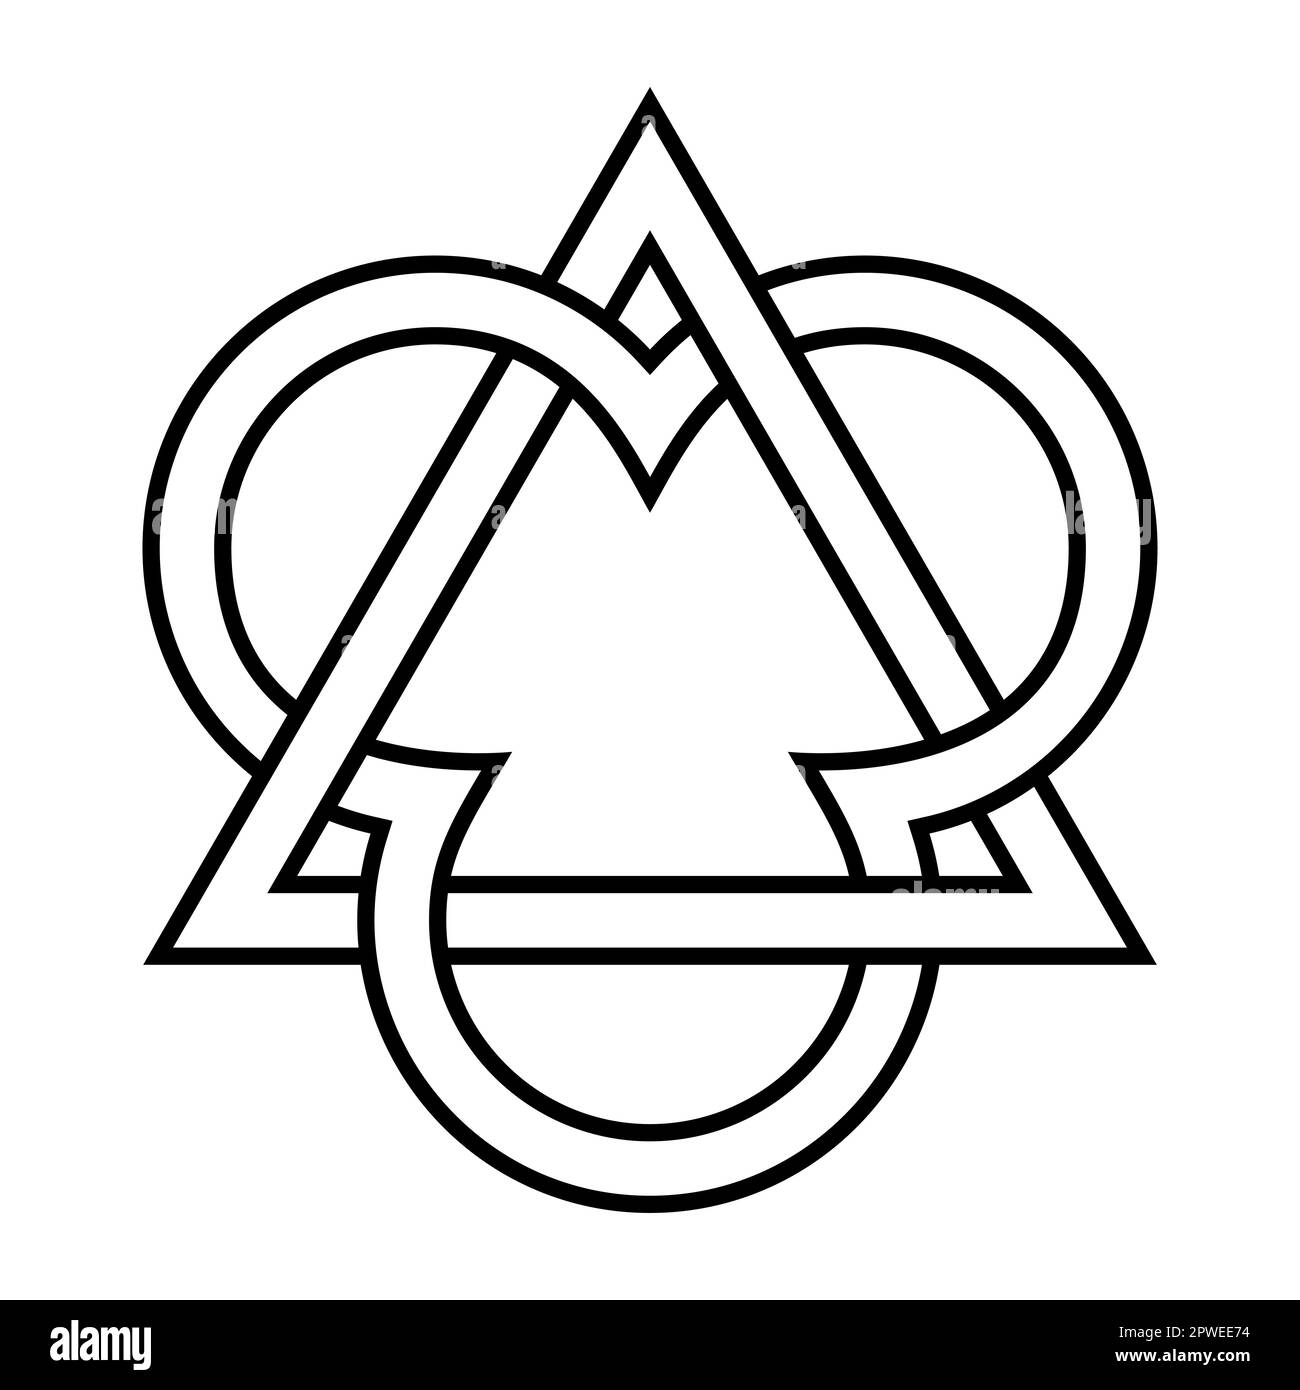 Triangle interlaced with three segments of a circle, an emblem of the Trinity. Three circles representing Father, Son Jesus Christ and the Holy Spirit. Stock Photo